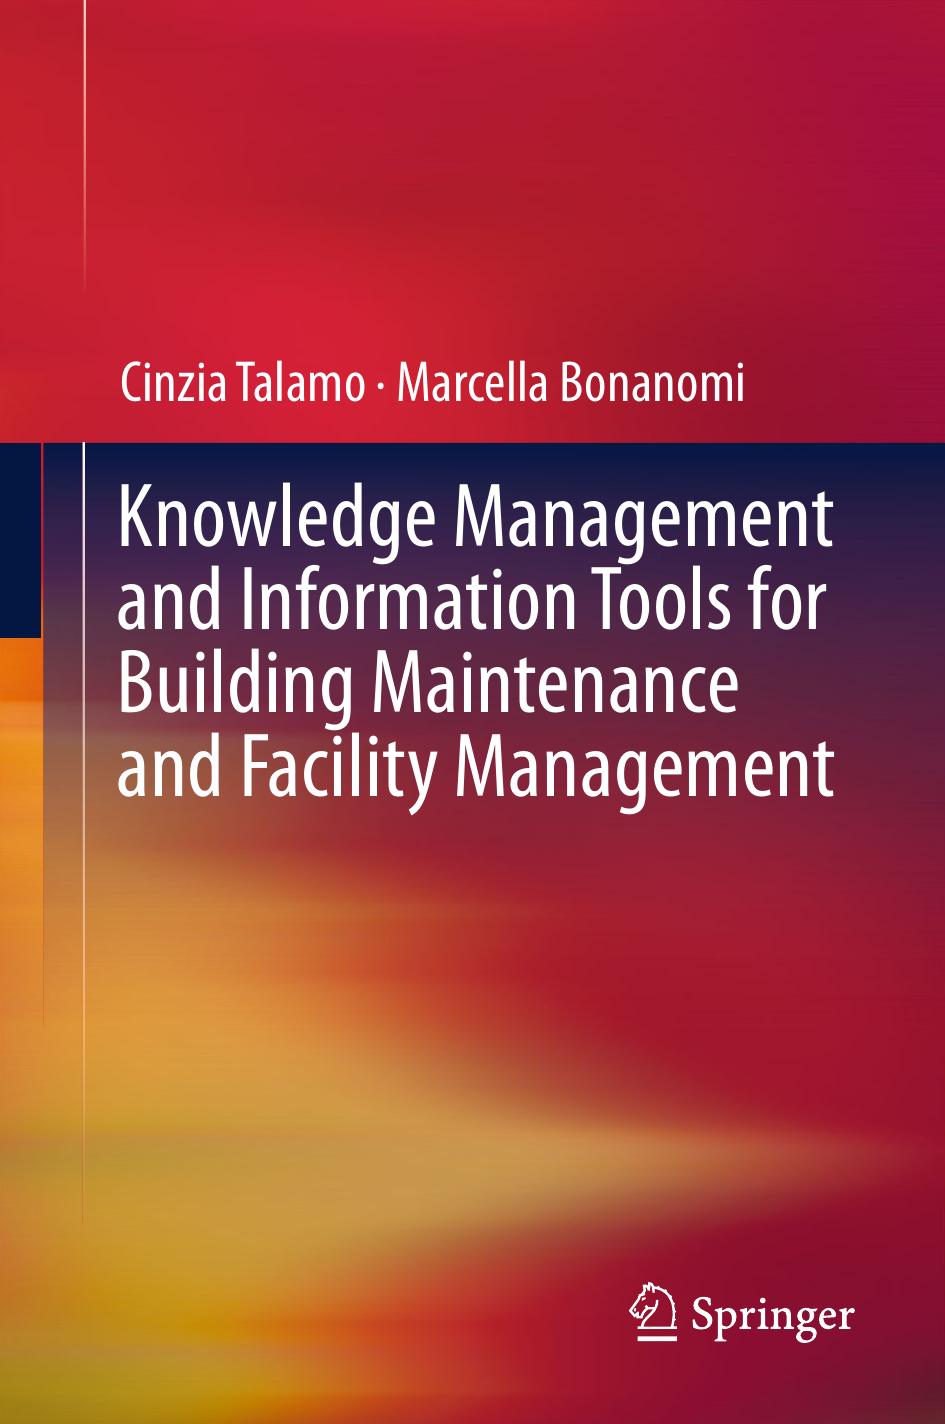 Knowledge Management and Information Tools for Building Maintenance and Facility Management by Cinzia Talamo, Marcella Bonanomi 2017